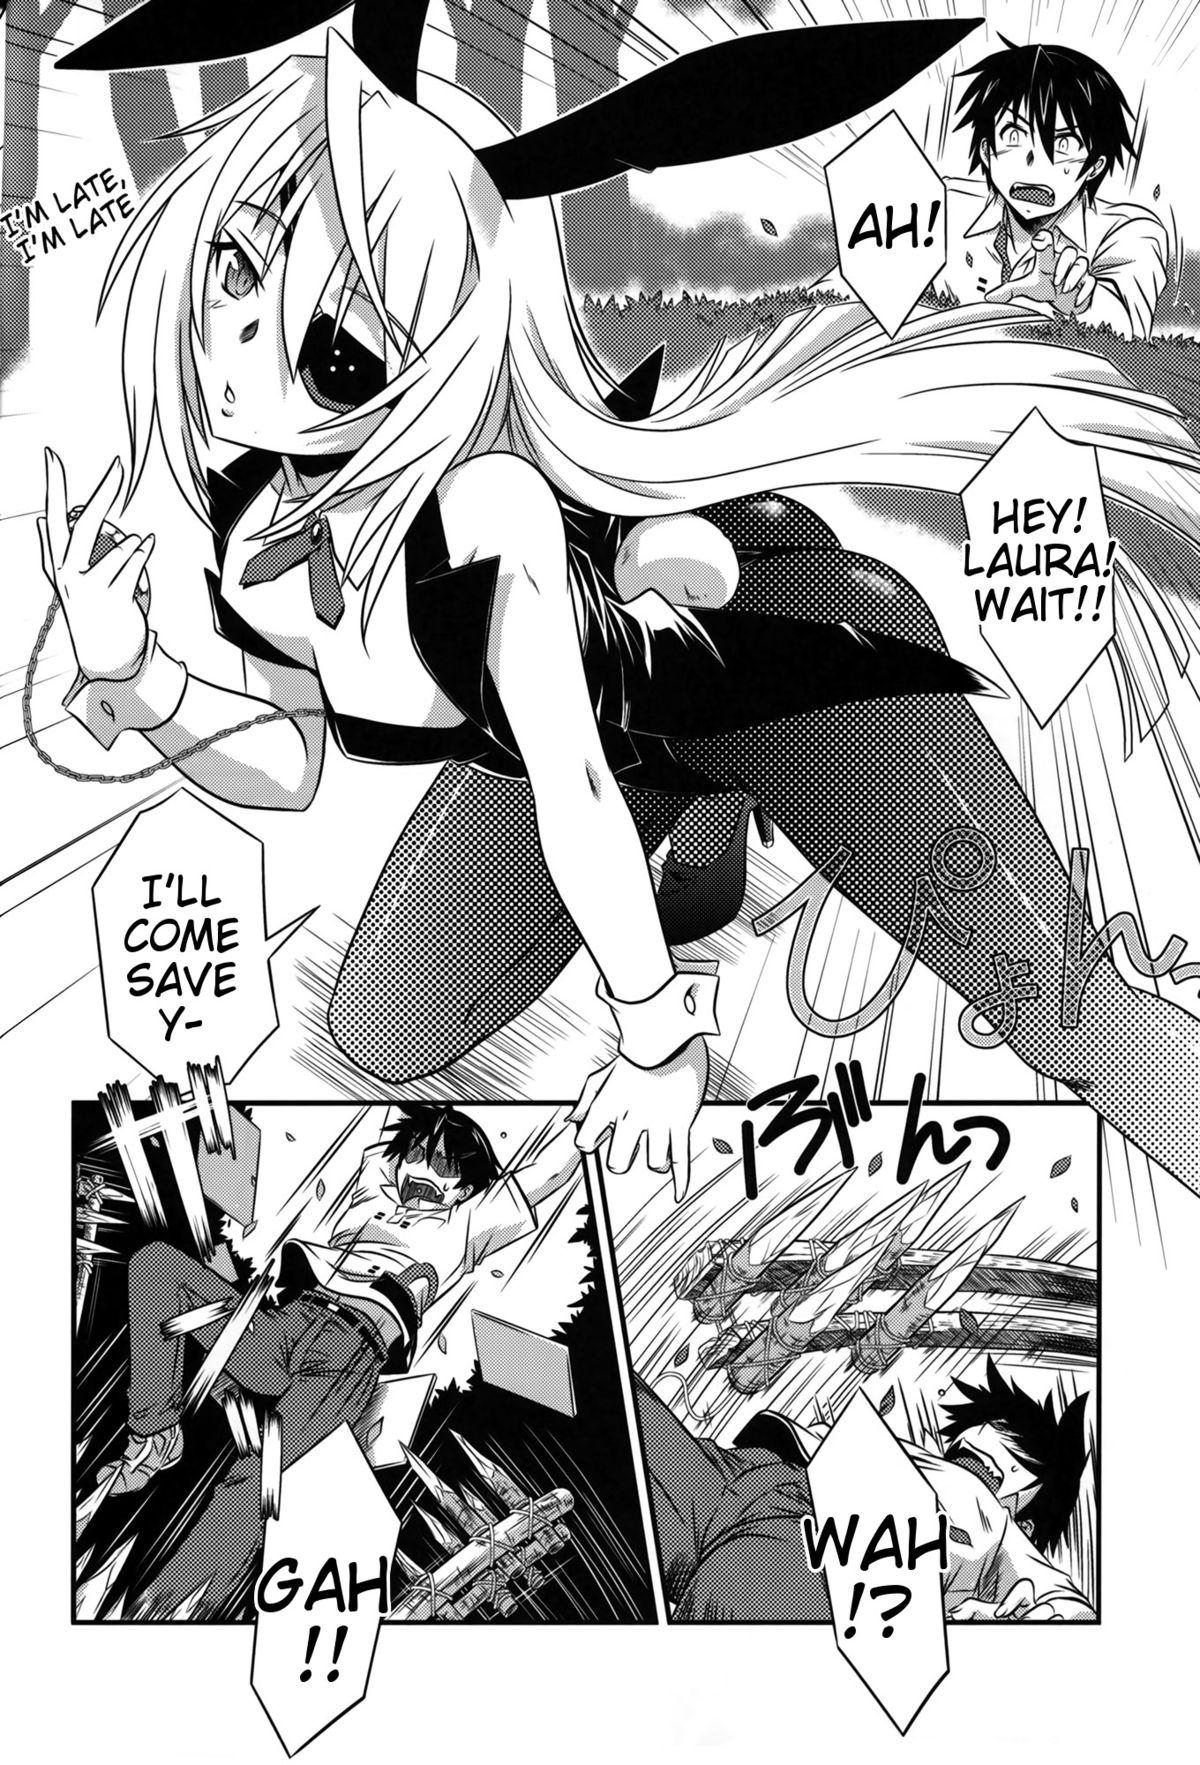 Swinger is Incest Strategy 4 - Infinite stratos Gay Cut - Page 4